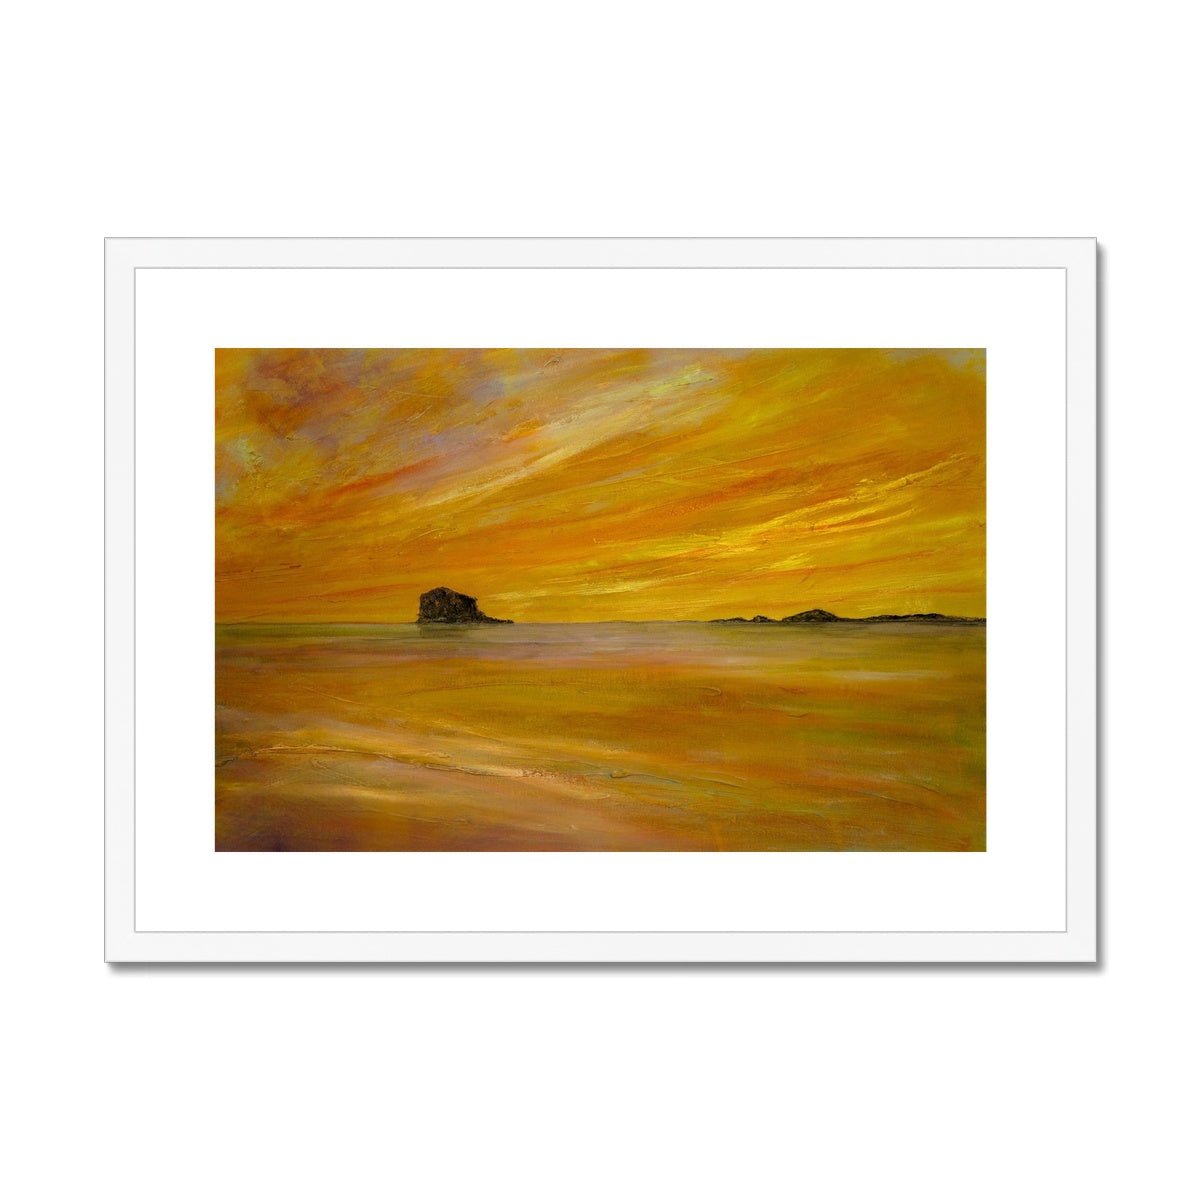 Bass Rock Dusk Painting | Framed & Mounted Prints From Scotland-Framed & Mounted Prints-Edinburgh & Glasgow Art Gallery-A2 Landscape-White Frame-Paintings, Prints, Homeware, Art Gifts From Scotland By Scottish Artist Kevin Hunter